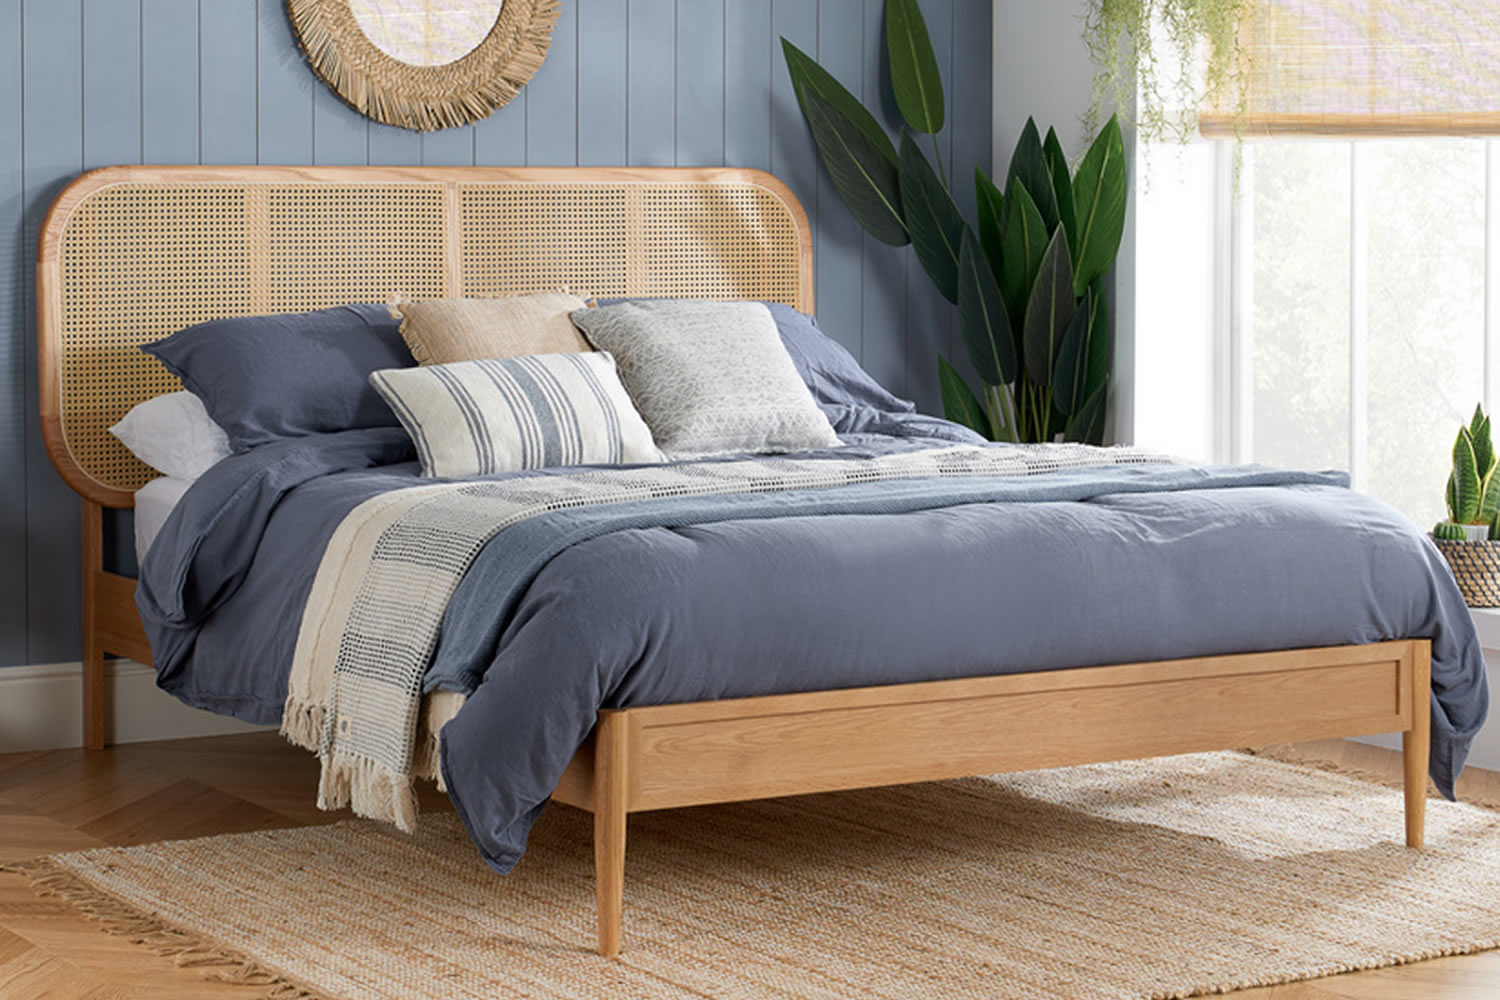 View Elina 50 King Size Wooden Bed Frame Crafted From Solid Oak Curved Rattan Headboard Low Foot End Sturdy Legs Sprung Slatted Base information